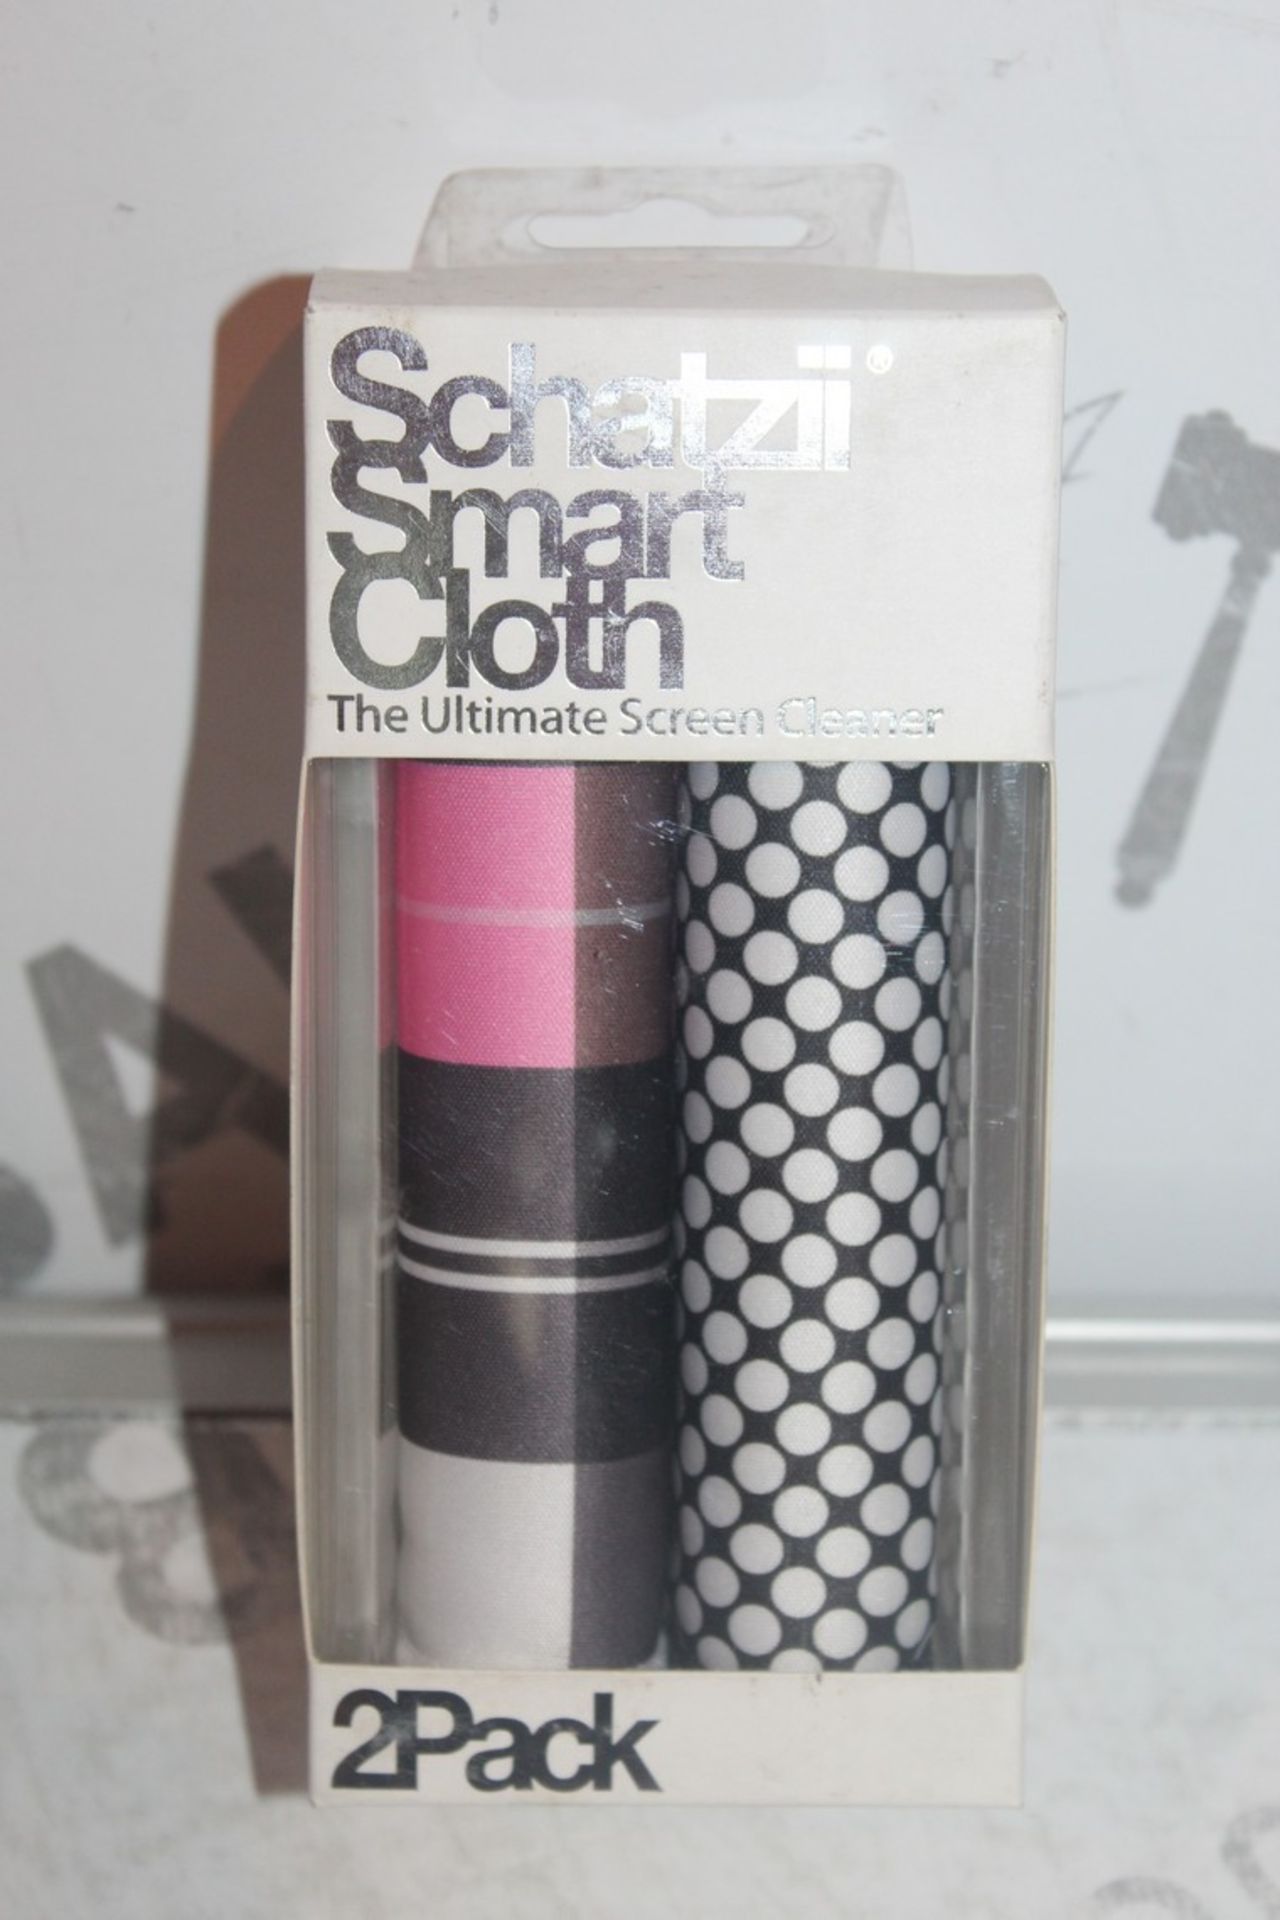 Lot to Contain 10 Brand New Schatzi Smart Cloth Tw